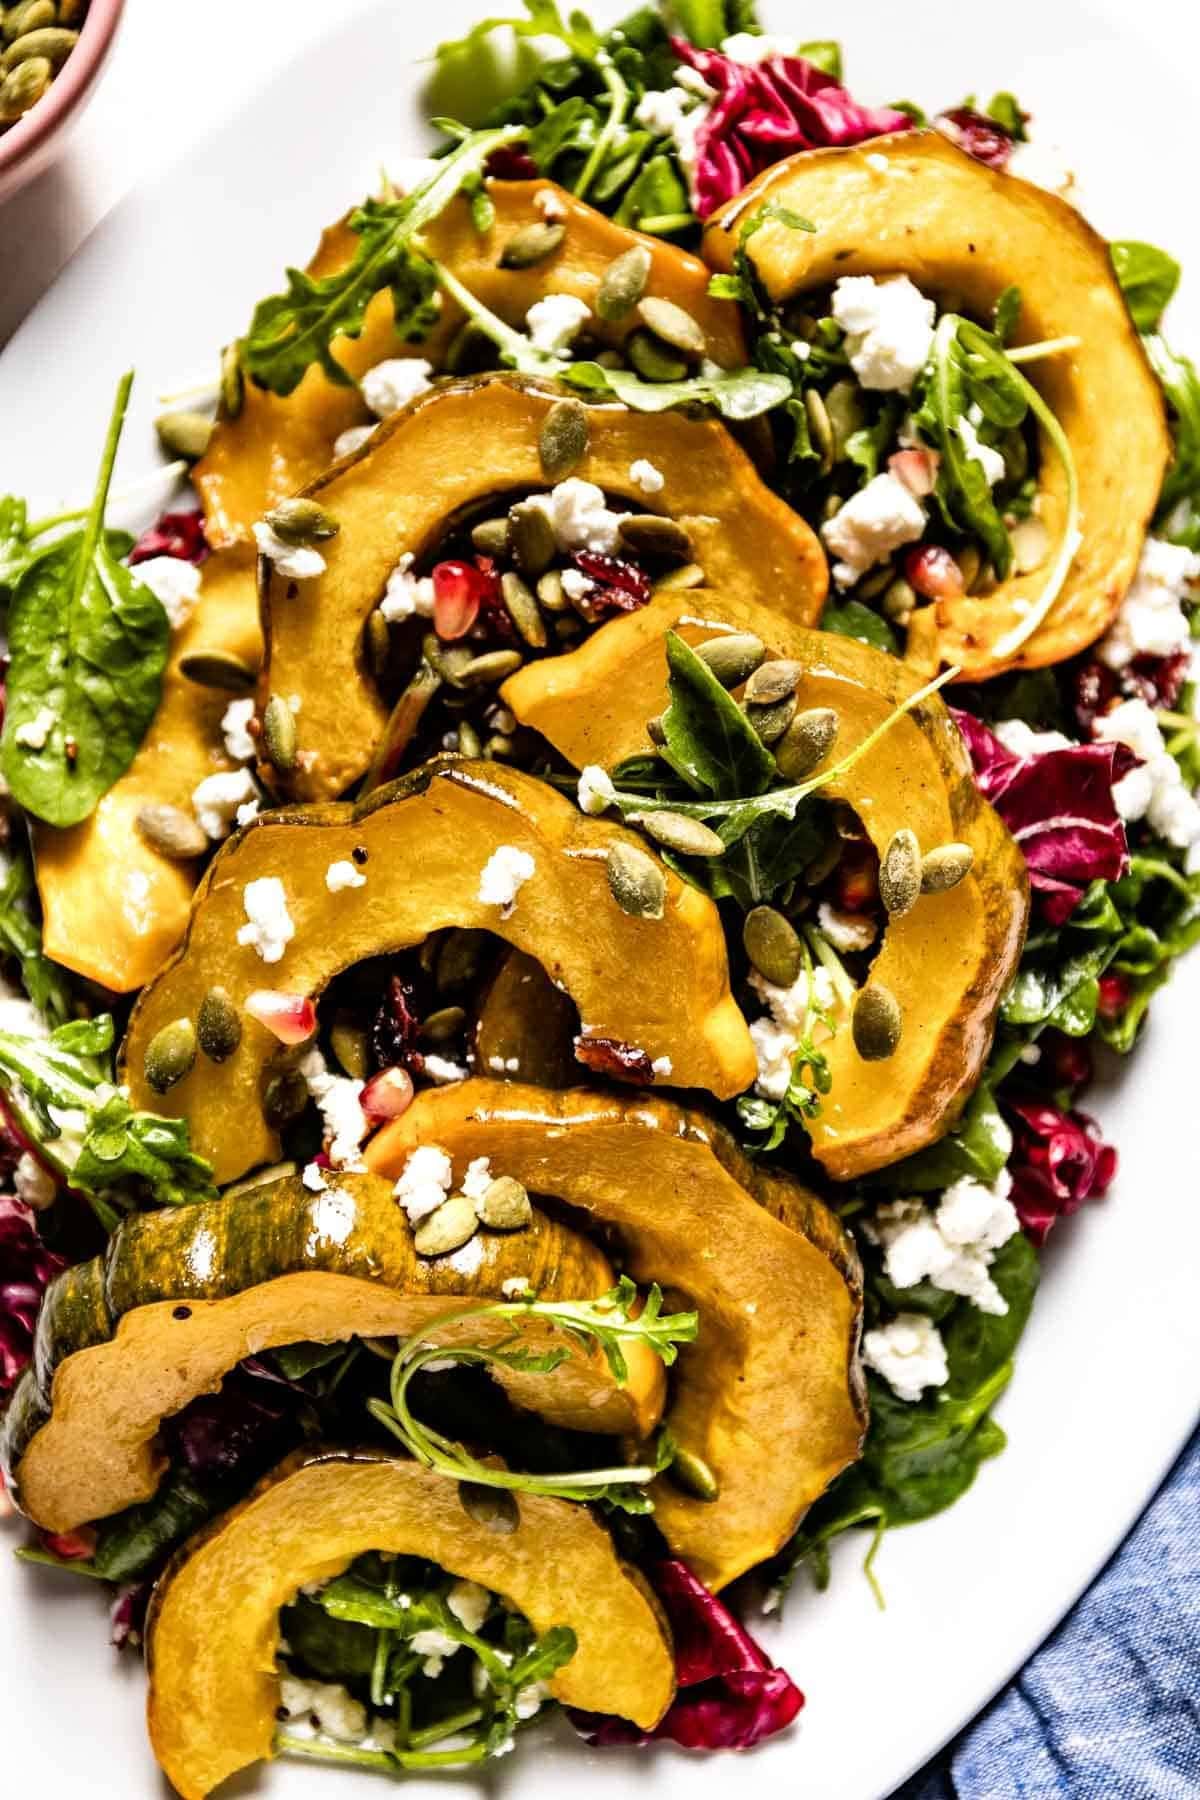 Roasted Acorn Squash Salad with Spicy Pepitas and Cranberries